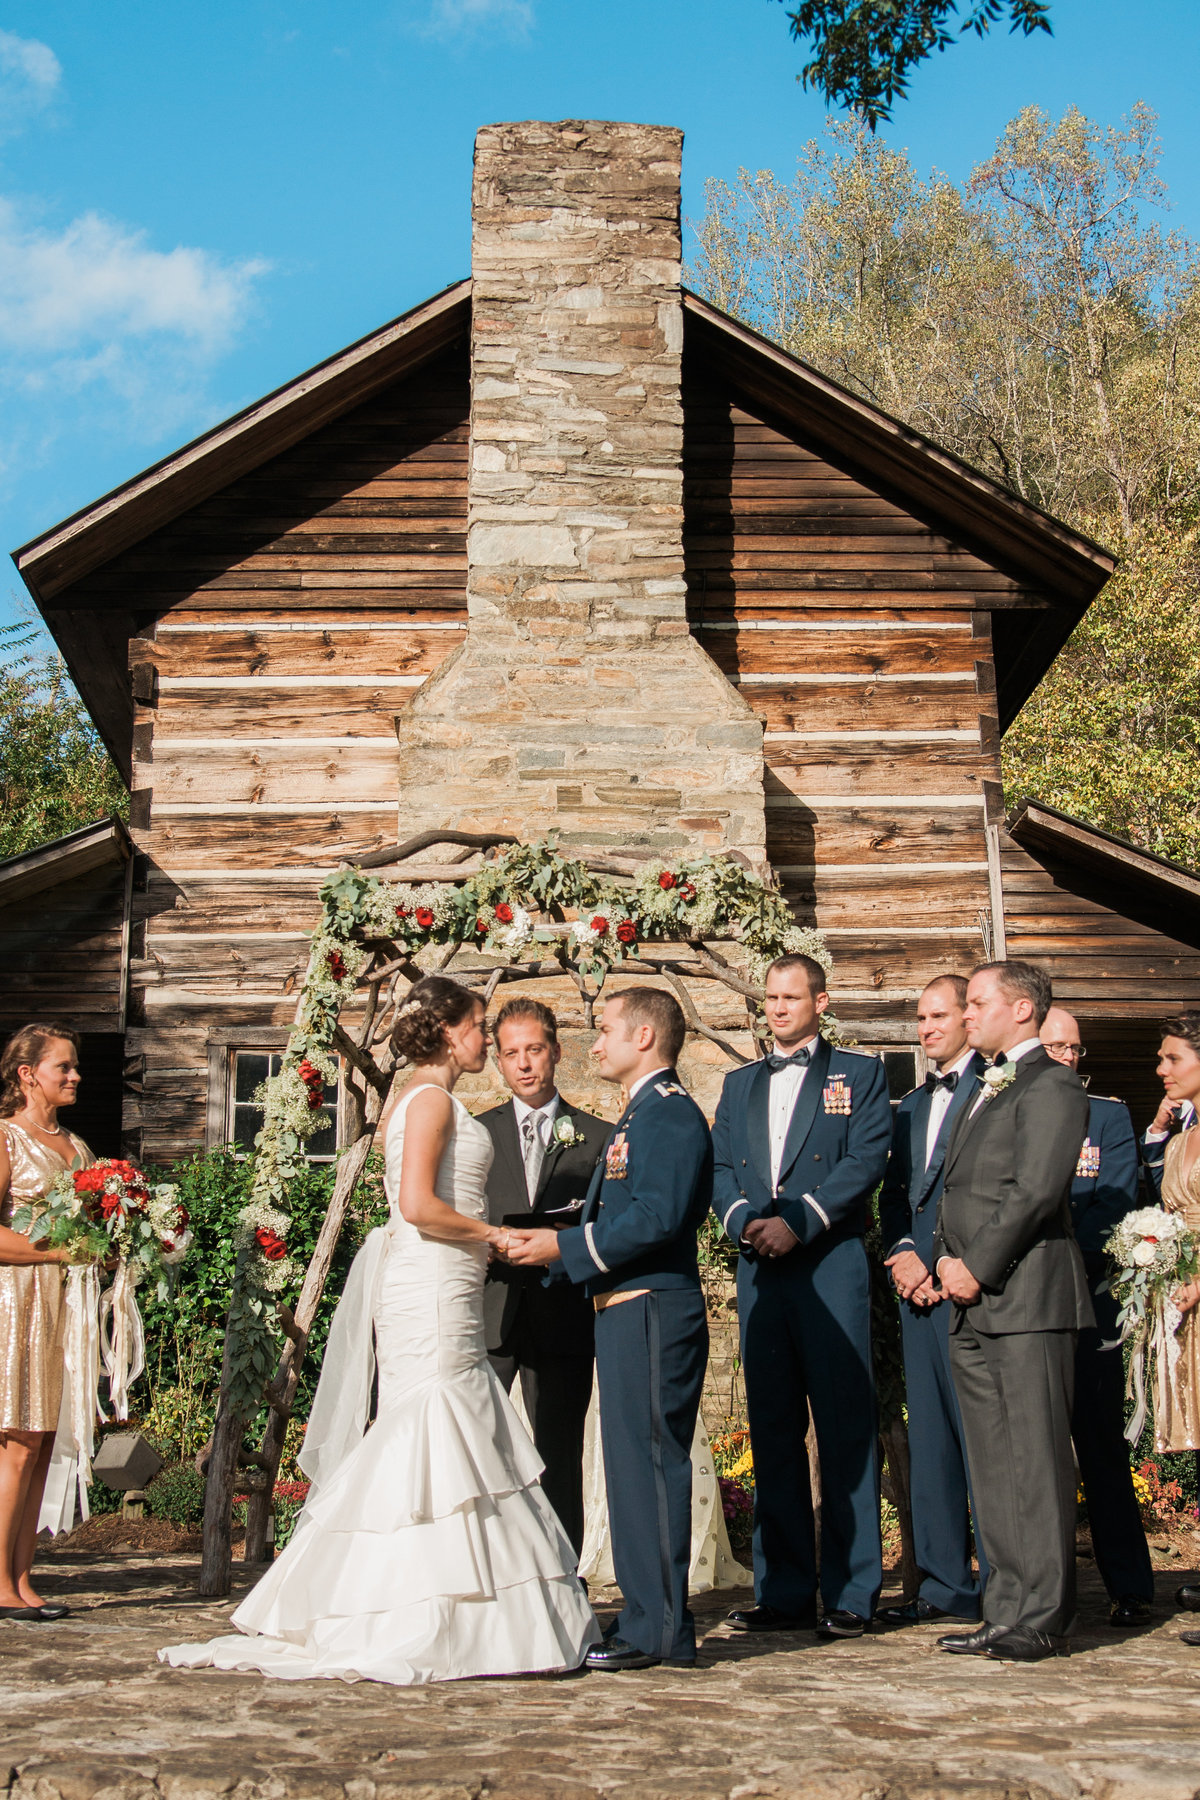 Rustic outdoor wedding photographed at Leatherwood Mountain by Boone Photographer Wayfaring Wanderer. Leatherwood is a gorgeous venue in Ferguson, NC.